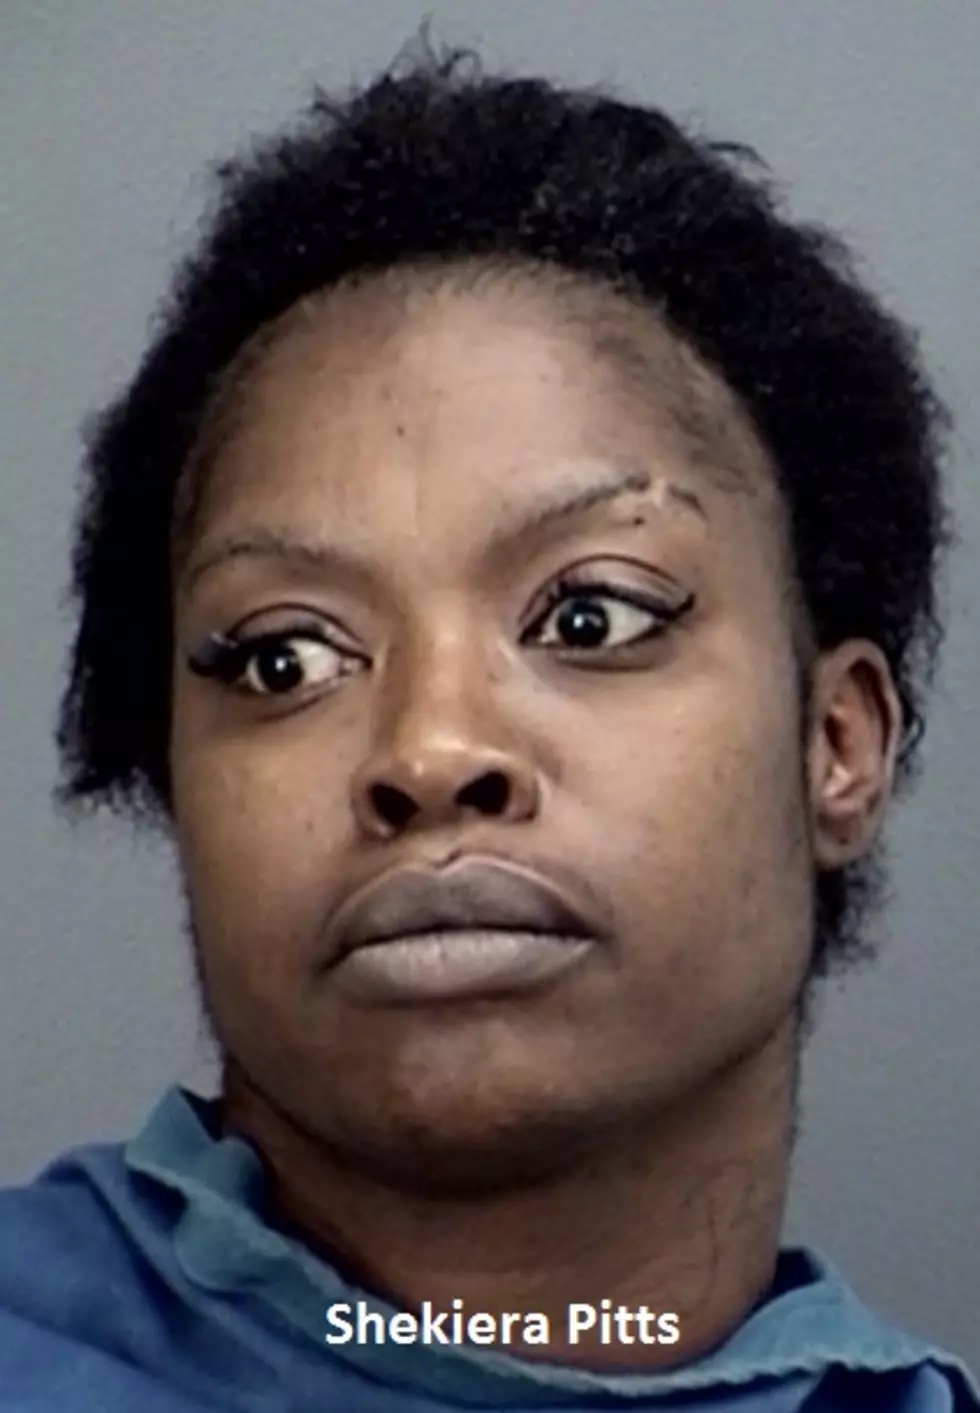 Wichita Falls Woman Arrested for Assault With Vehicle, Toy Gun